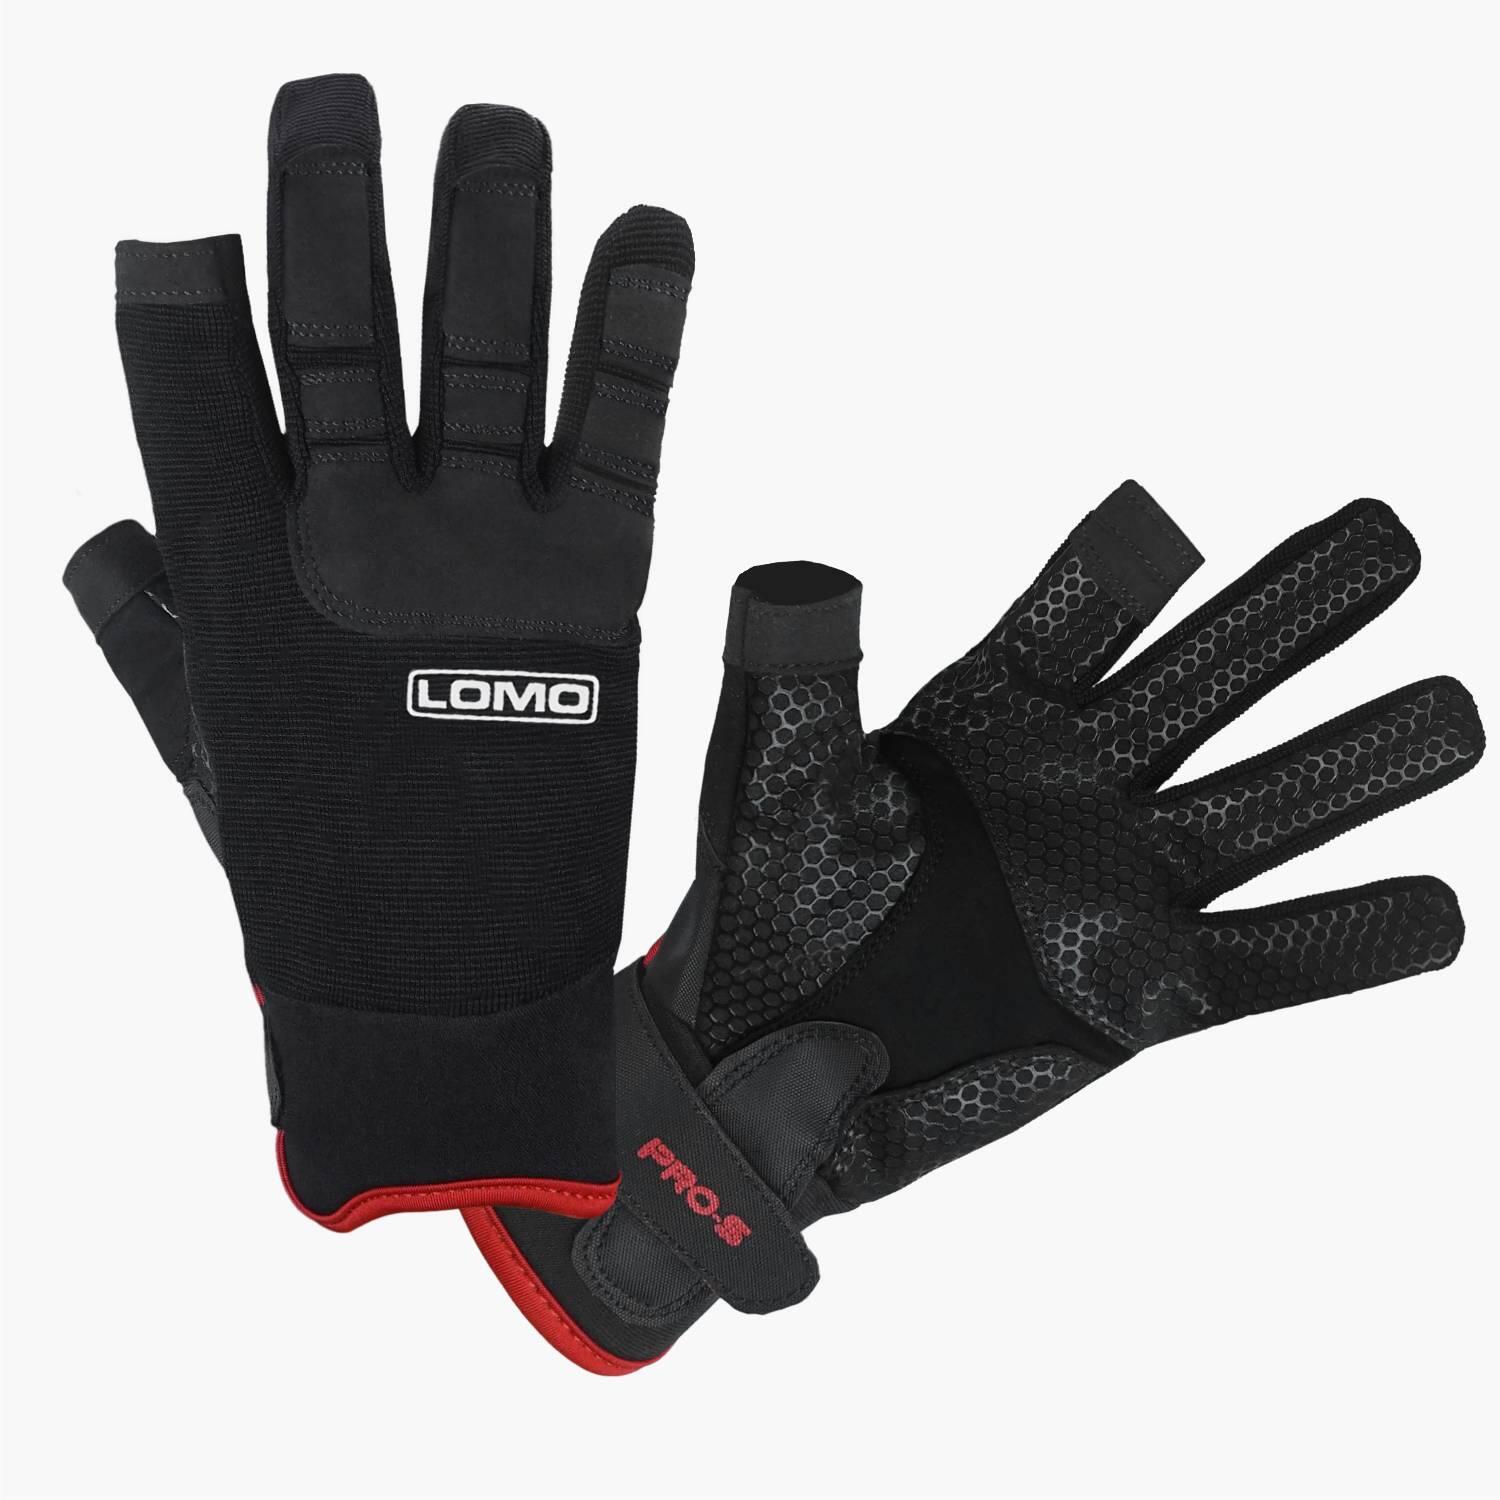 Sailing Pro-S Gloves - SIT (Short Index finger and Thumb) 1/7